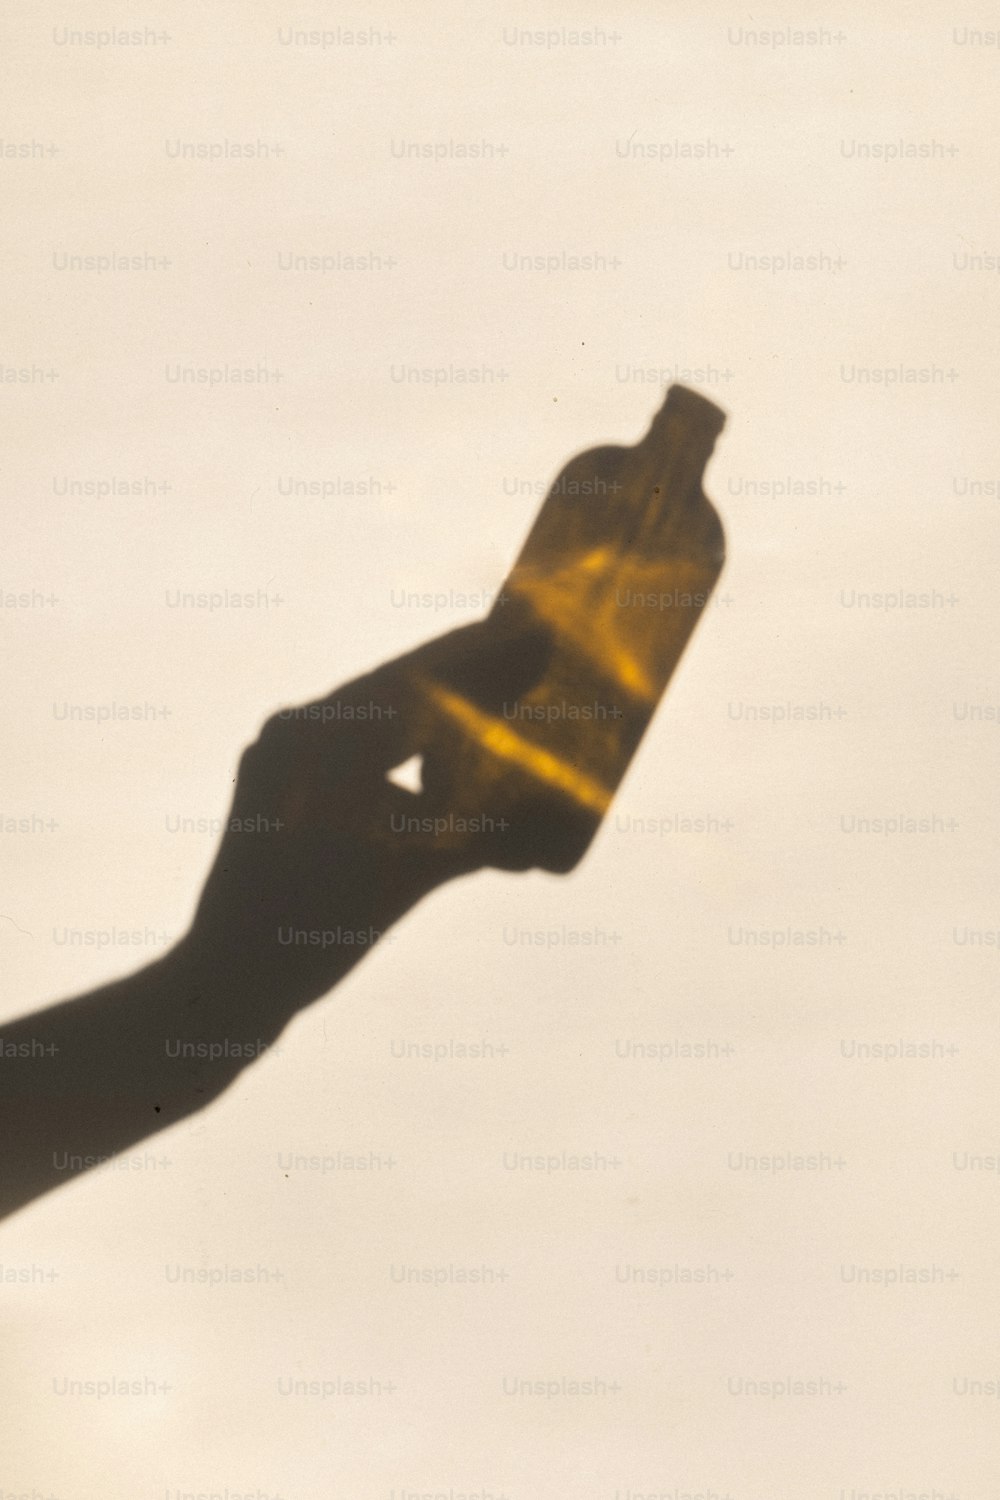 a shadow of a hand holding a bottle